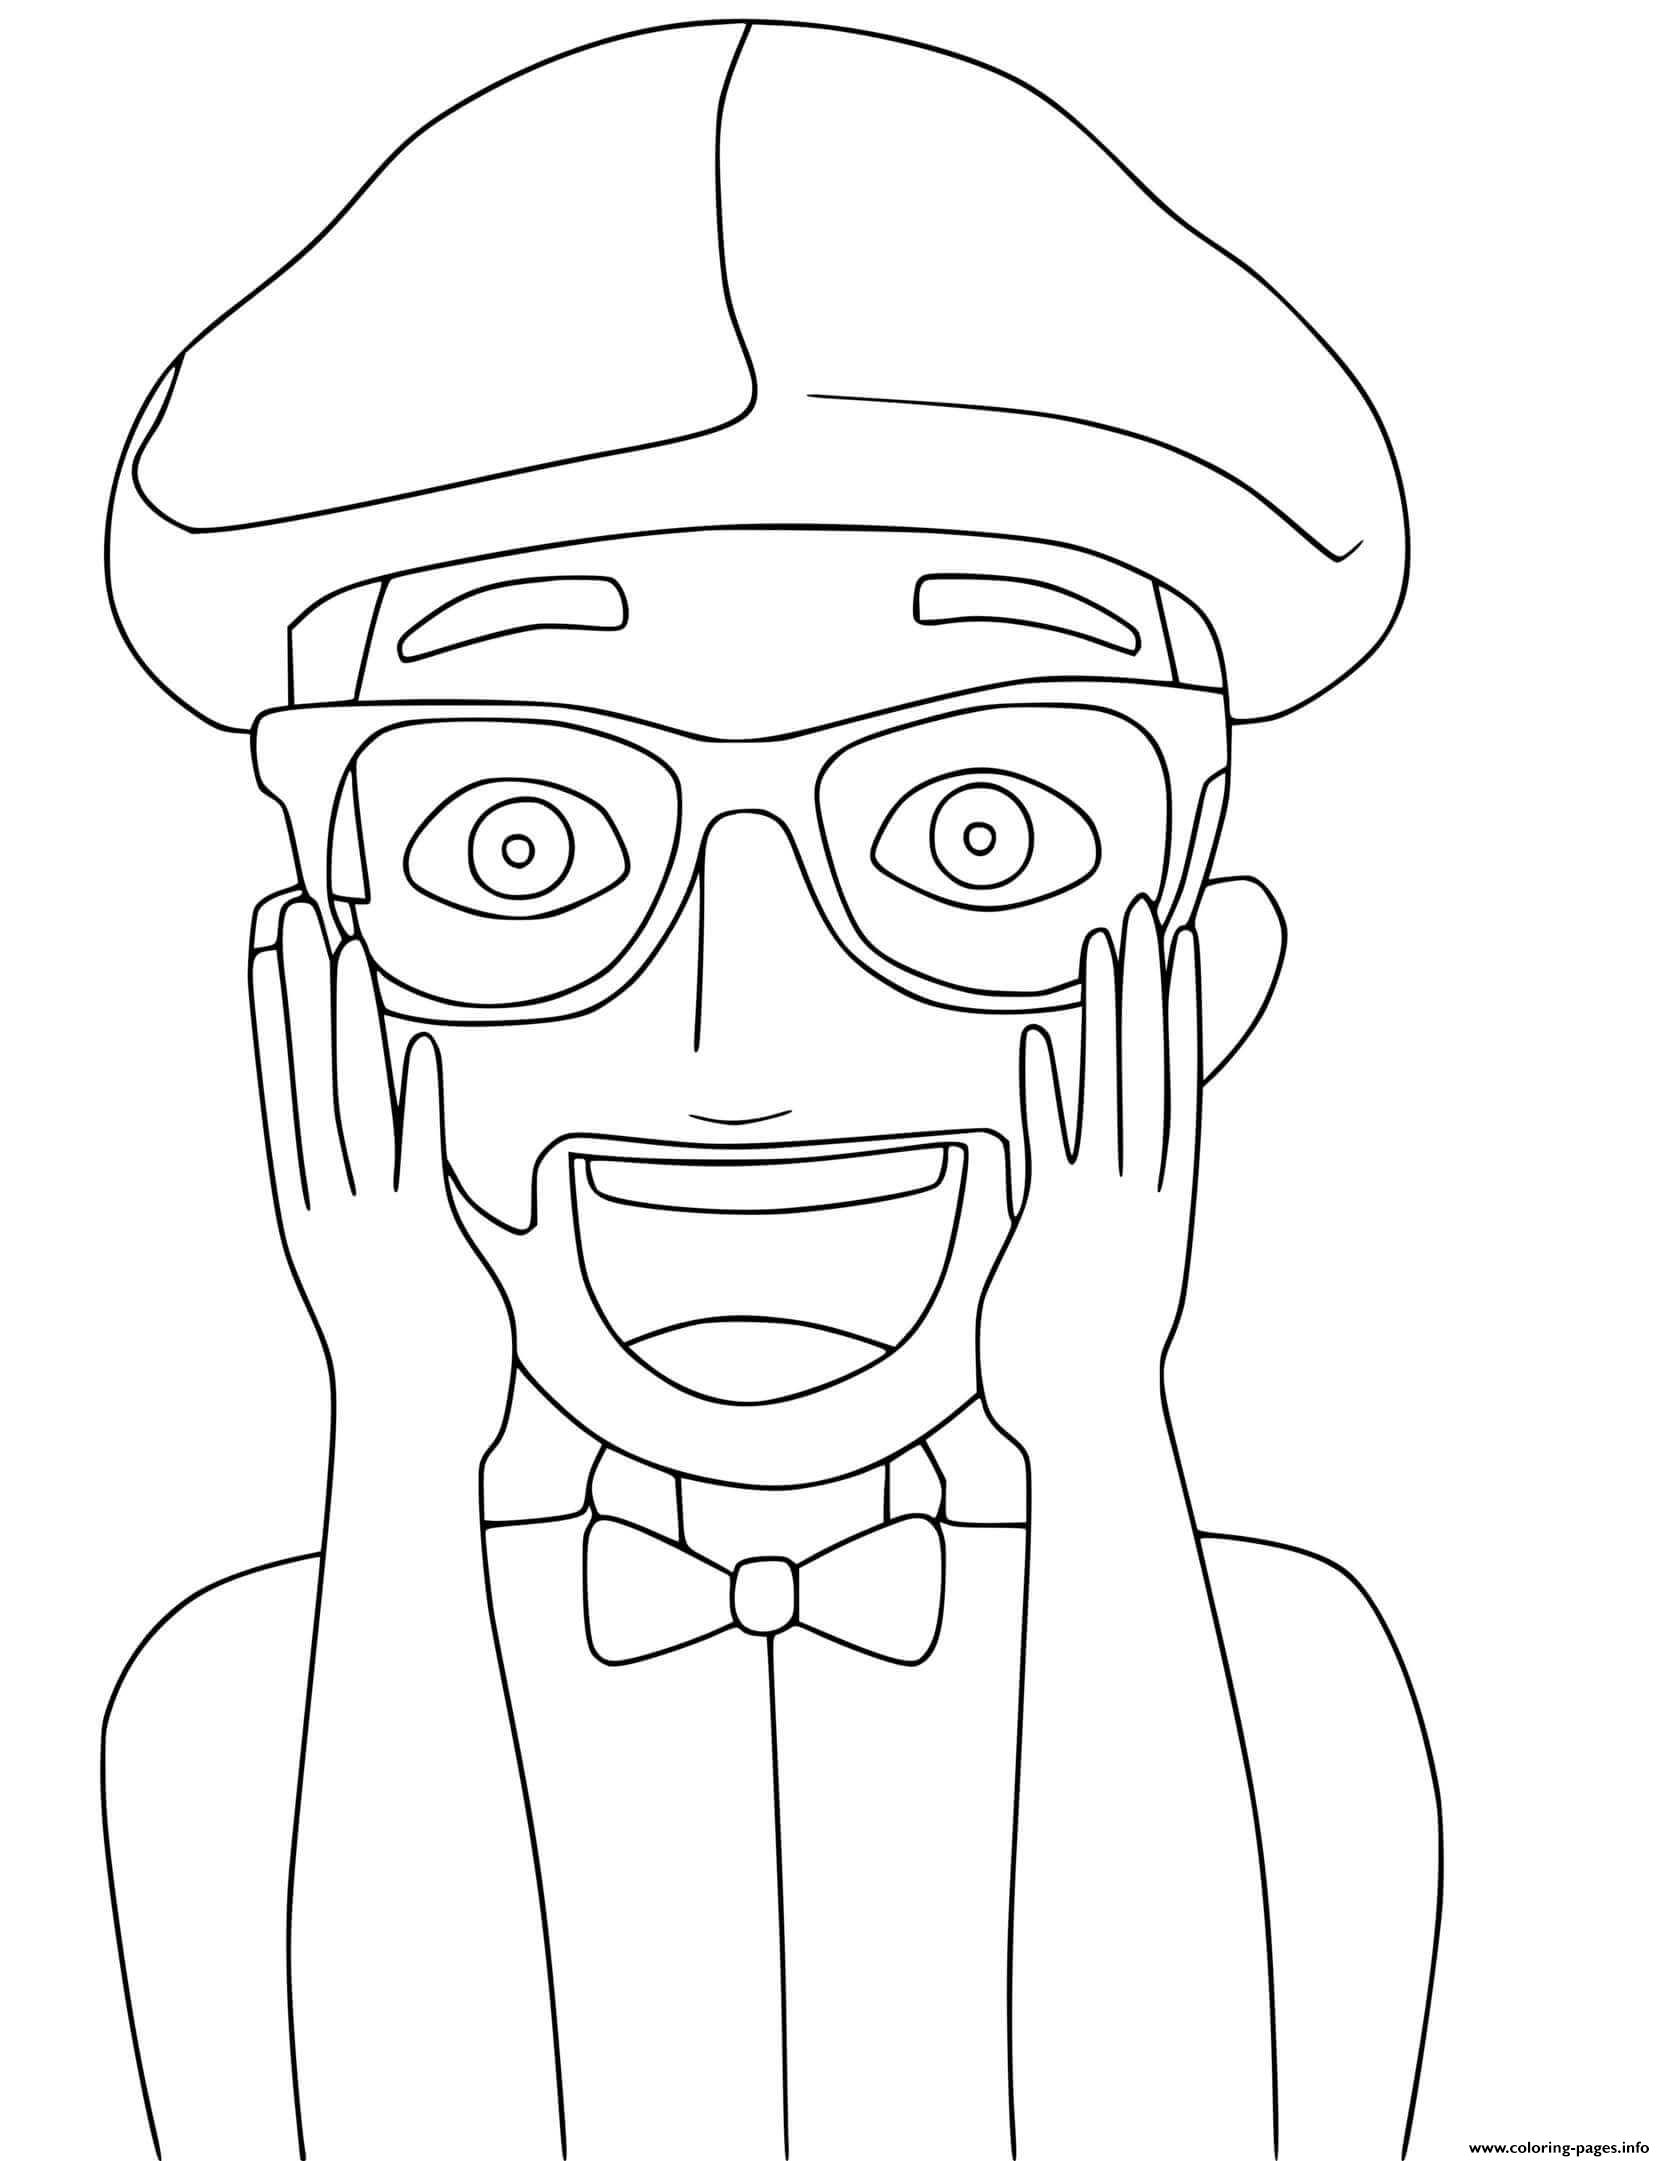 Printable Blippi Coloring Pages Customize and Print